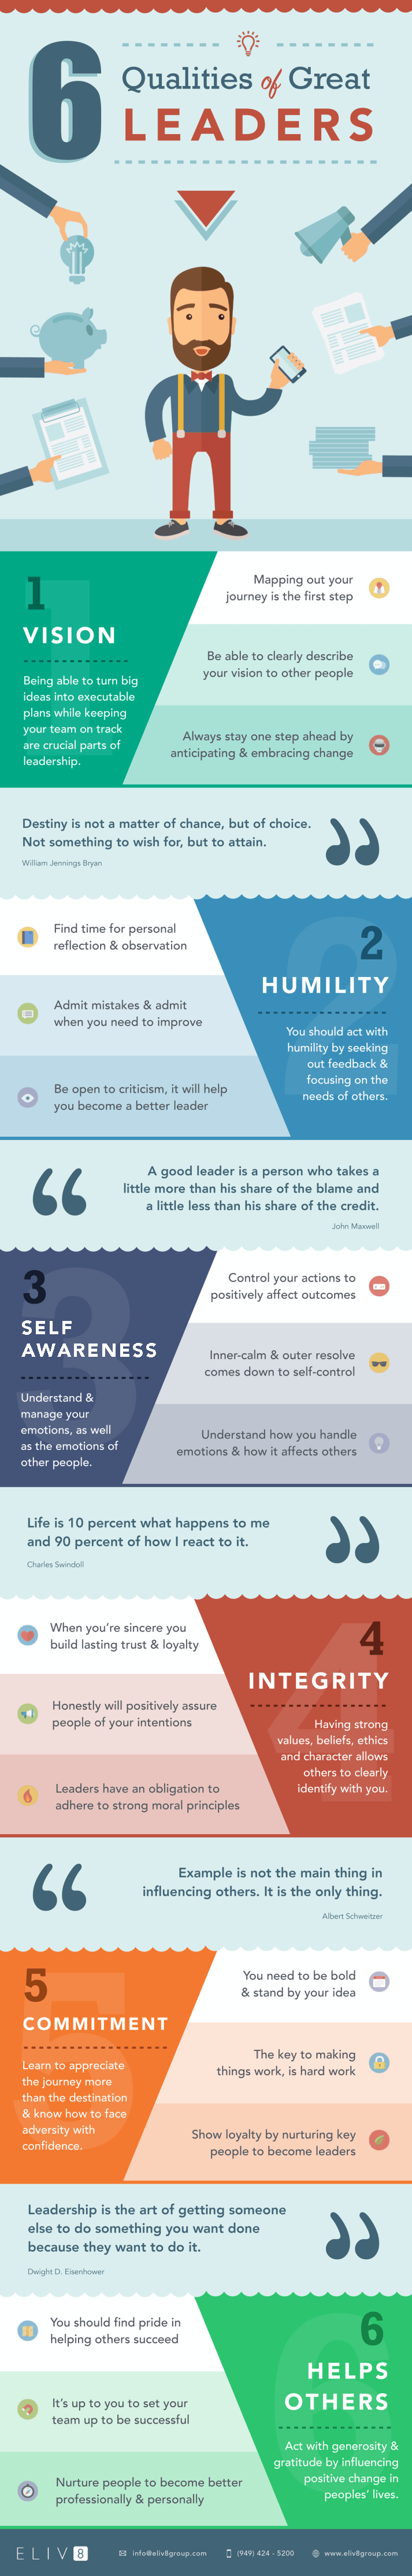 Top 6 Qualities of Great Leaders Infographic